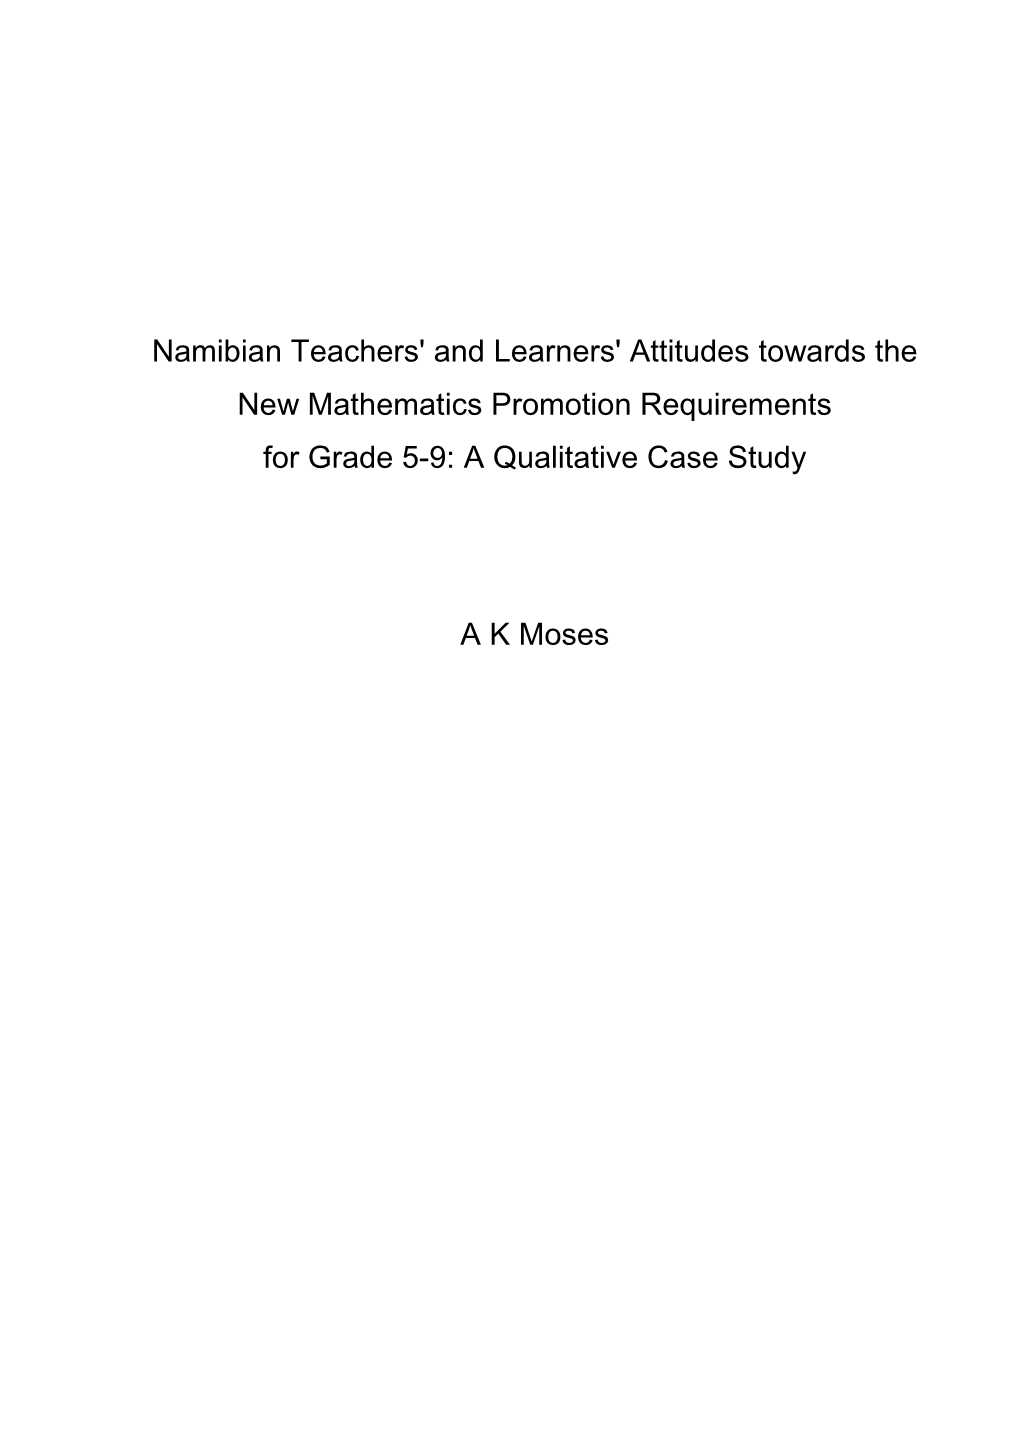 Namibian Teachers' and Learners' Attitudes Towards the New Mathematics Promotion Requirements for Grade 5-9: a Qualitative Case Study